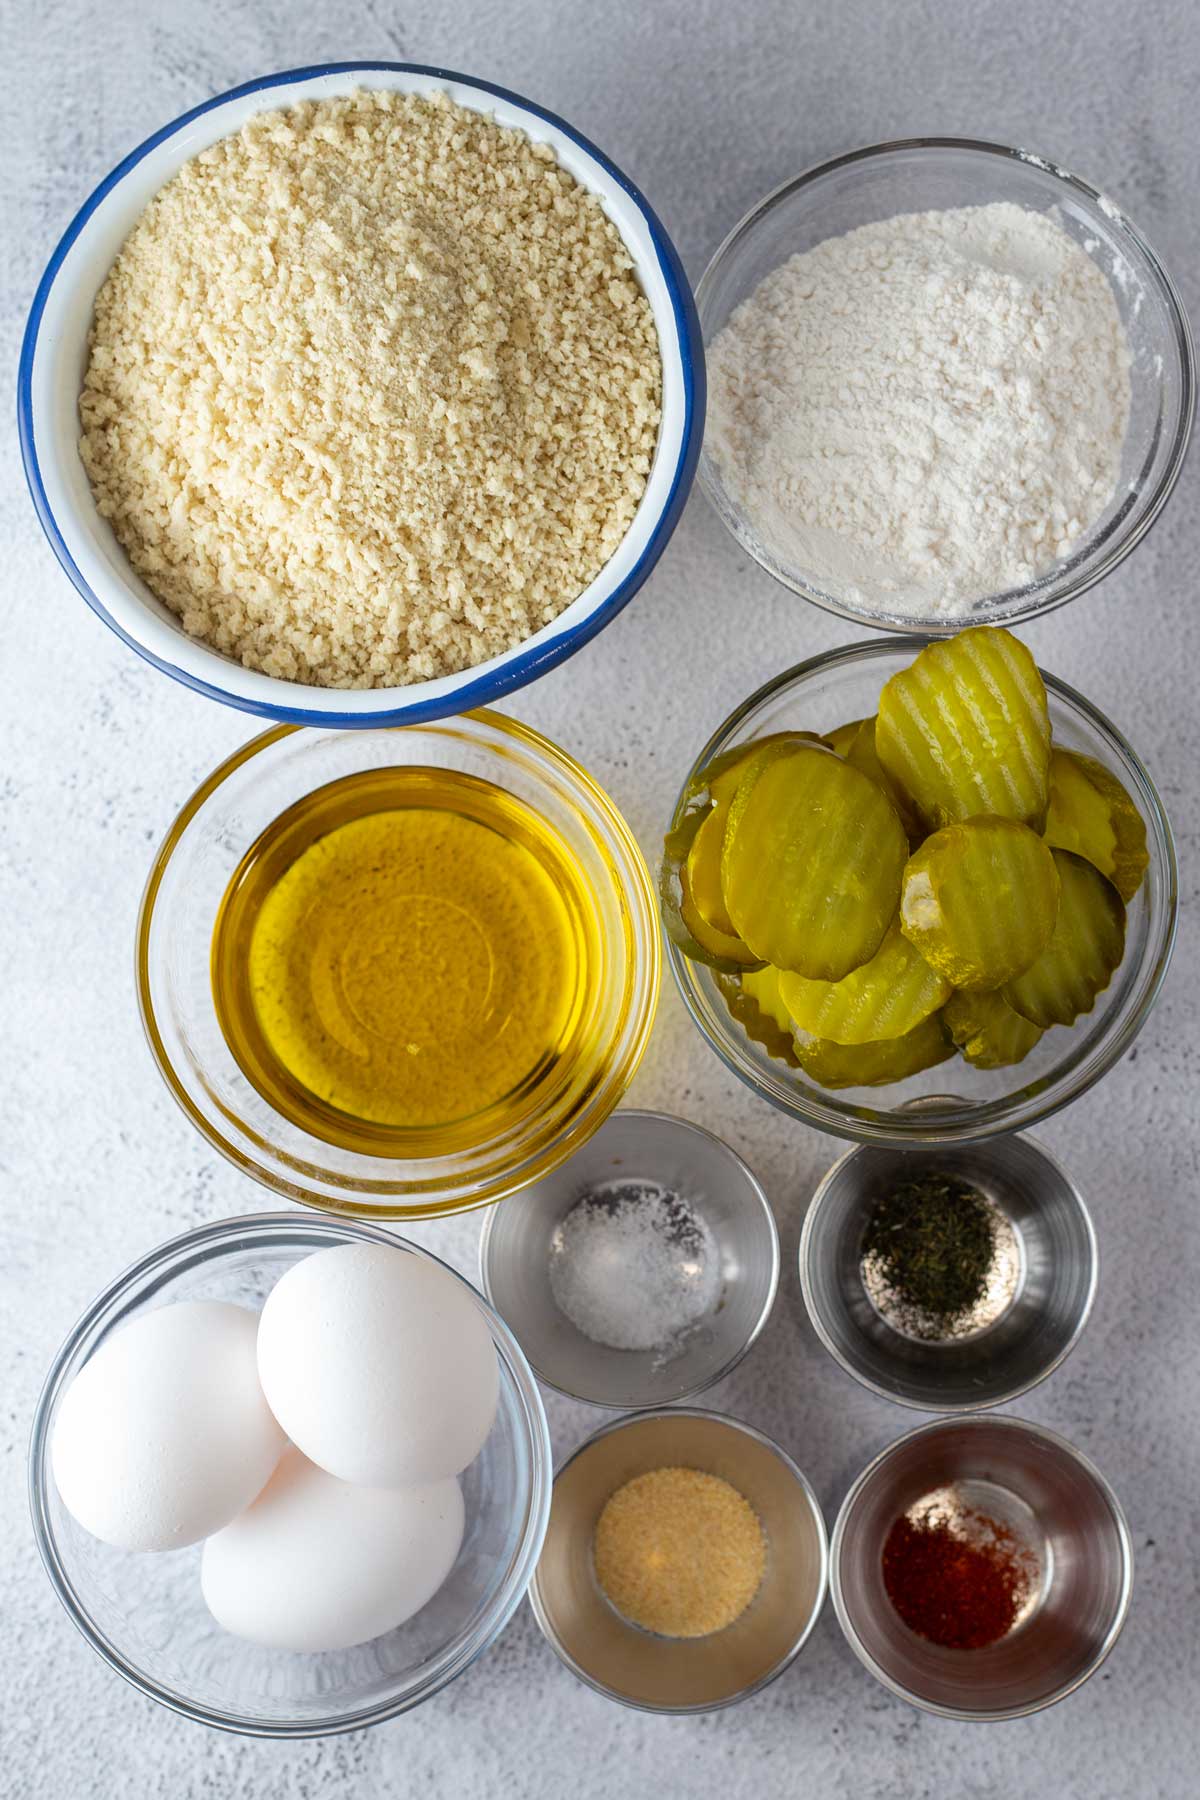 Tall image showing fried pickle ingredients.